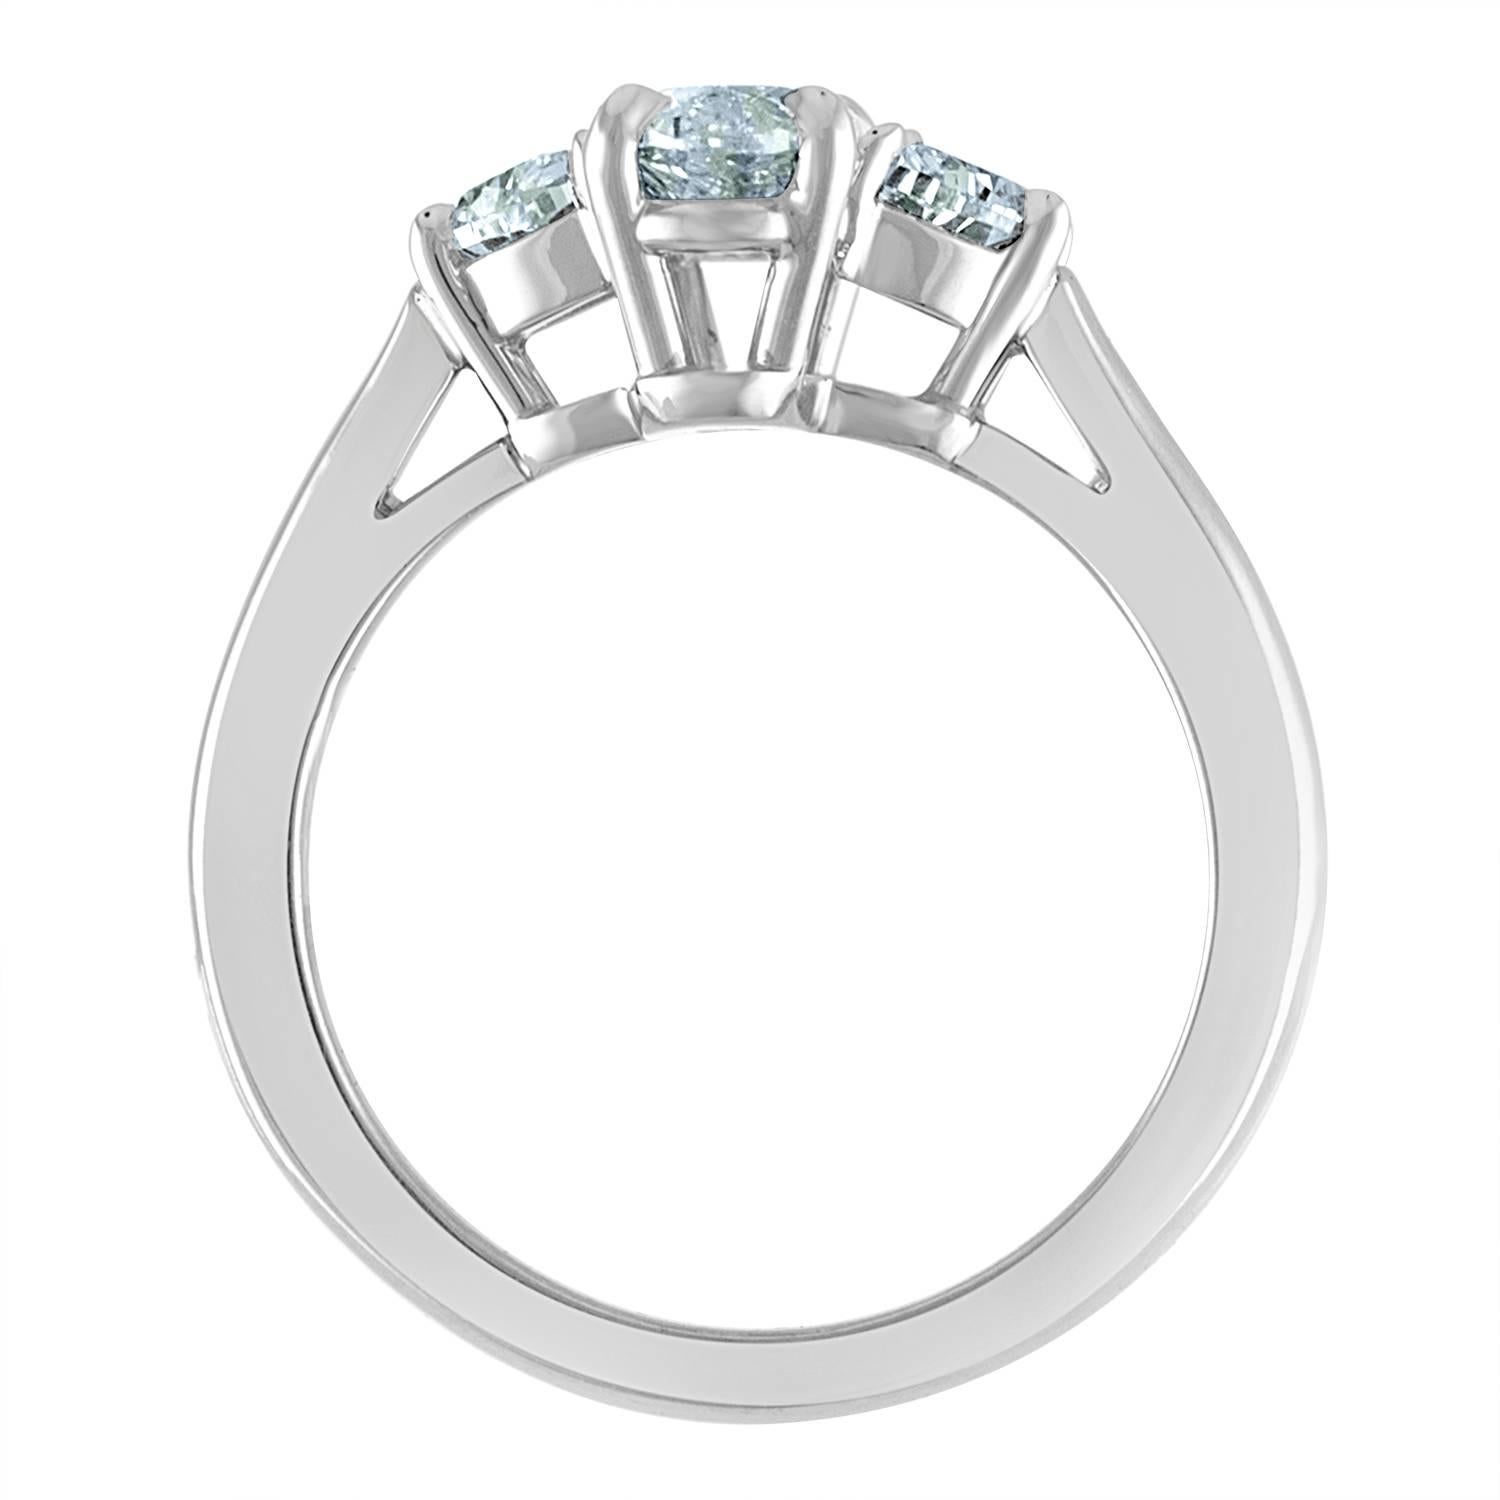 Contemporary 1.55 Carat Oval Diamond GIA Certified Set in Platinum Ring Mounting